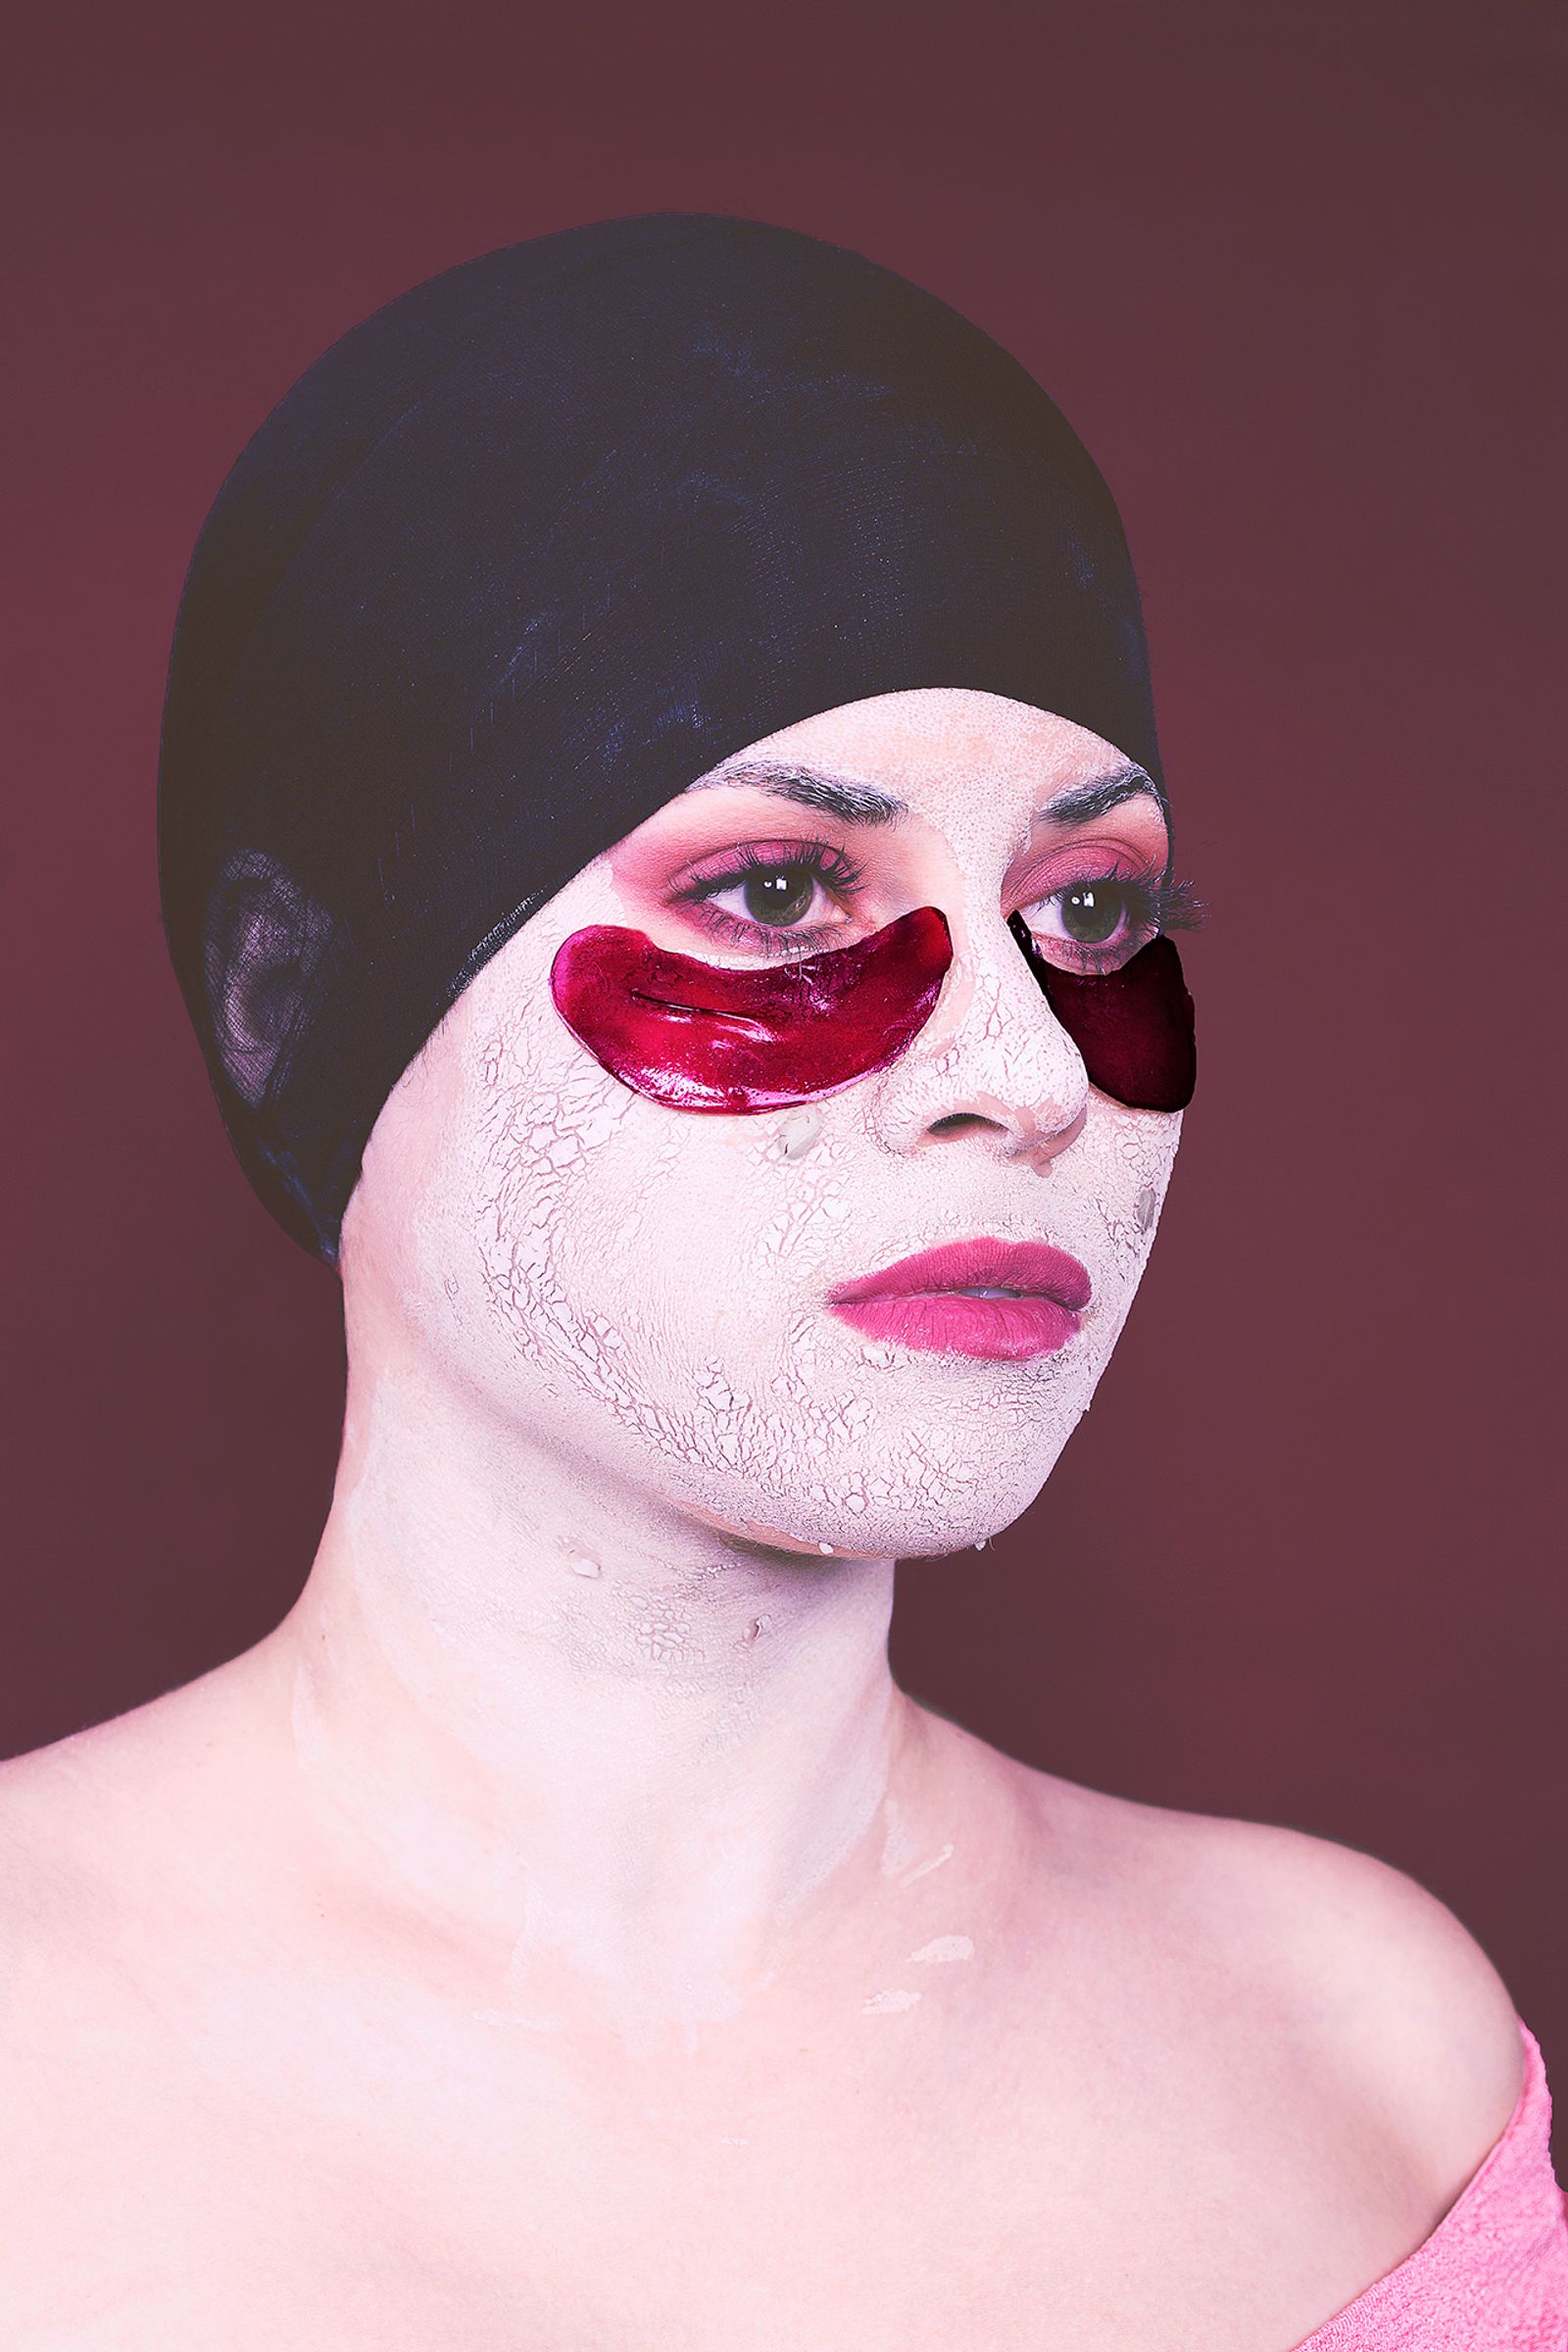 © Ana Espinal - Pink Mask, Archival inkjet print, 20 x 30 in. or smaller size.